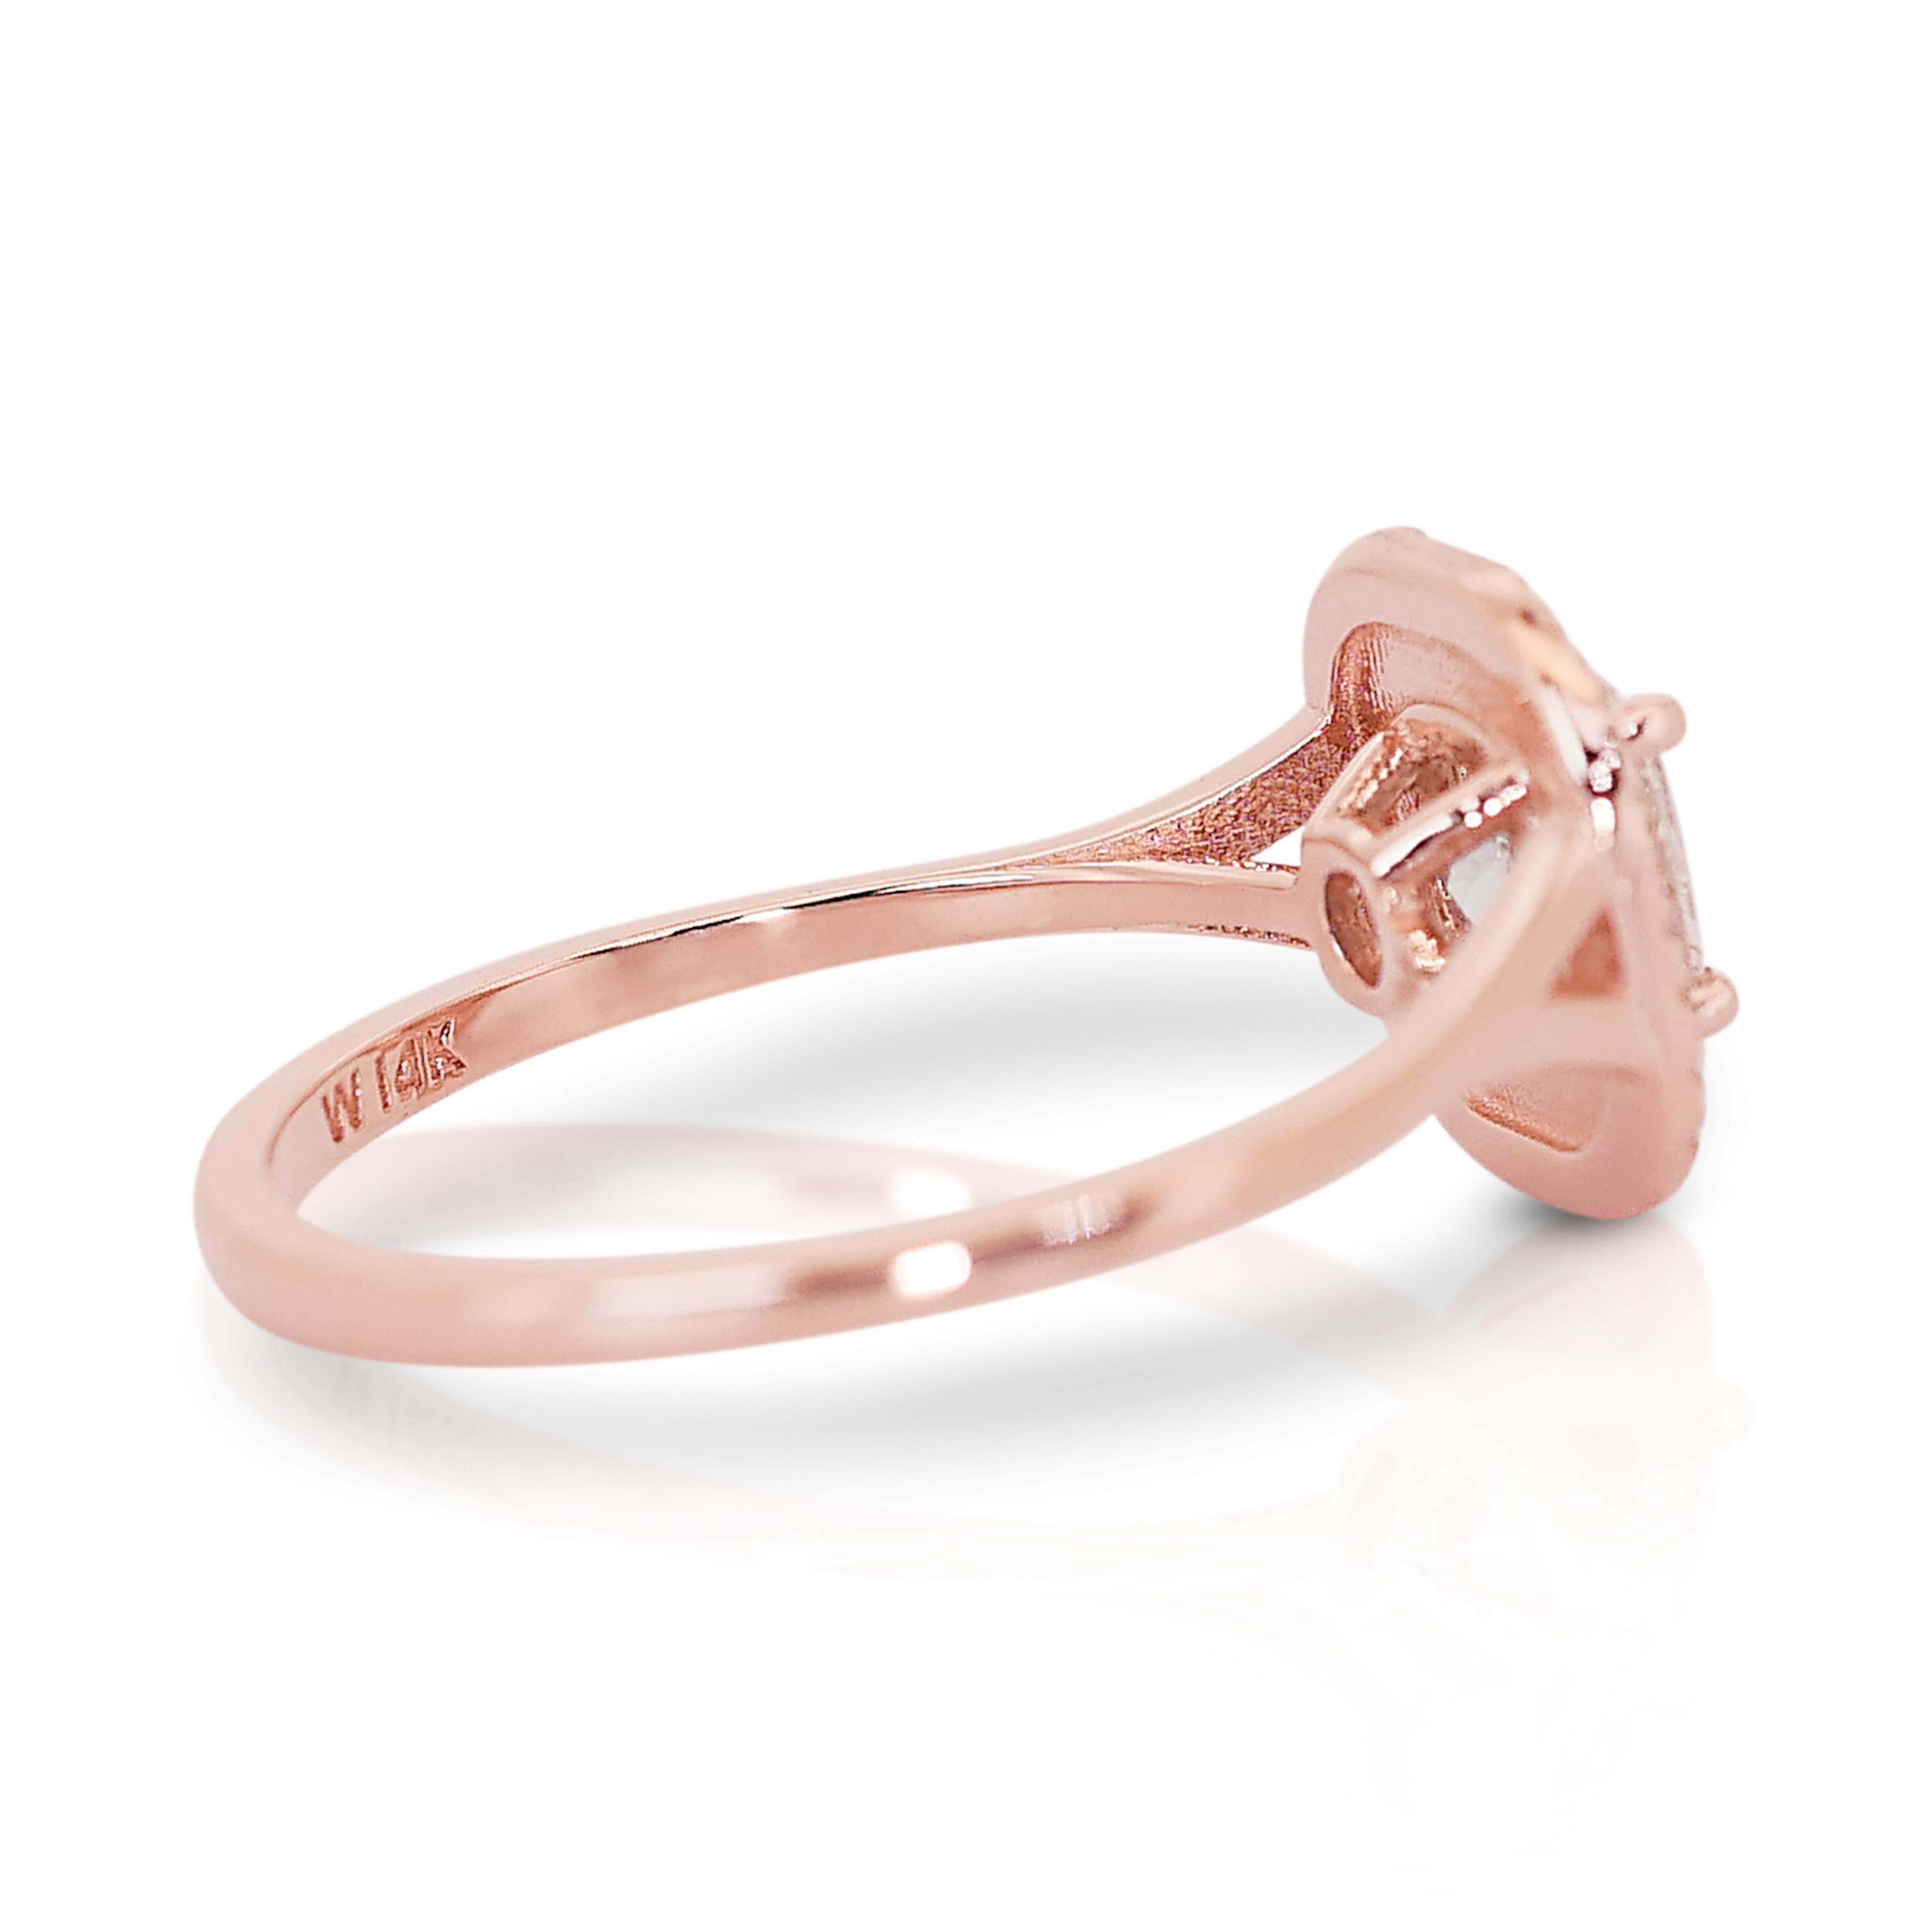 Glamorous 14k Rose Gold Double Halo Diamond Ring w/1.09 ct - IGI Certified In New Condition For Sale In רמת גן, IL